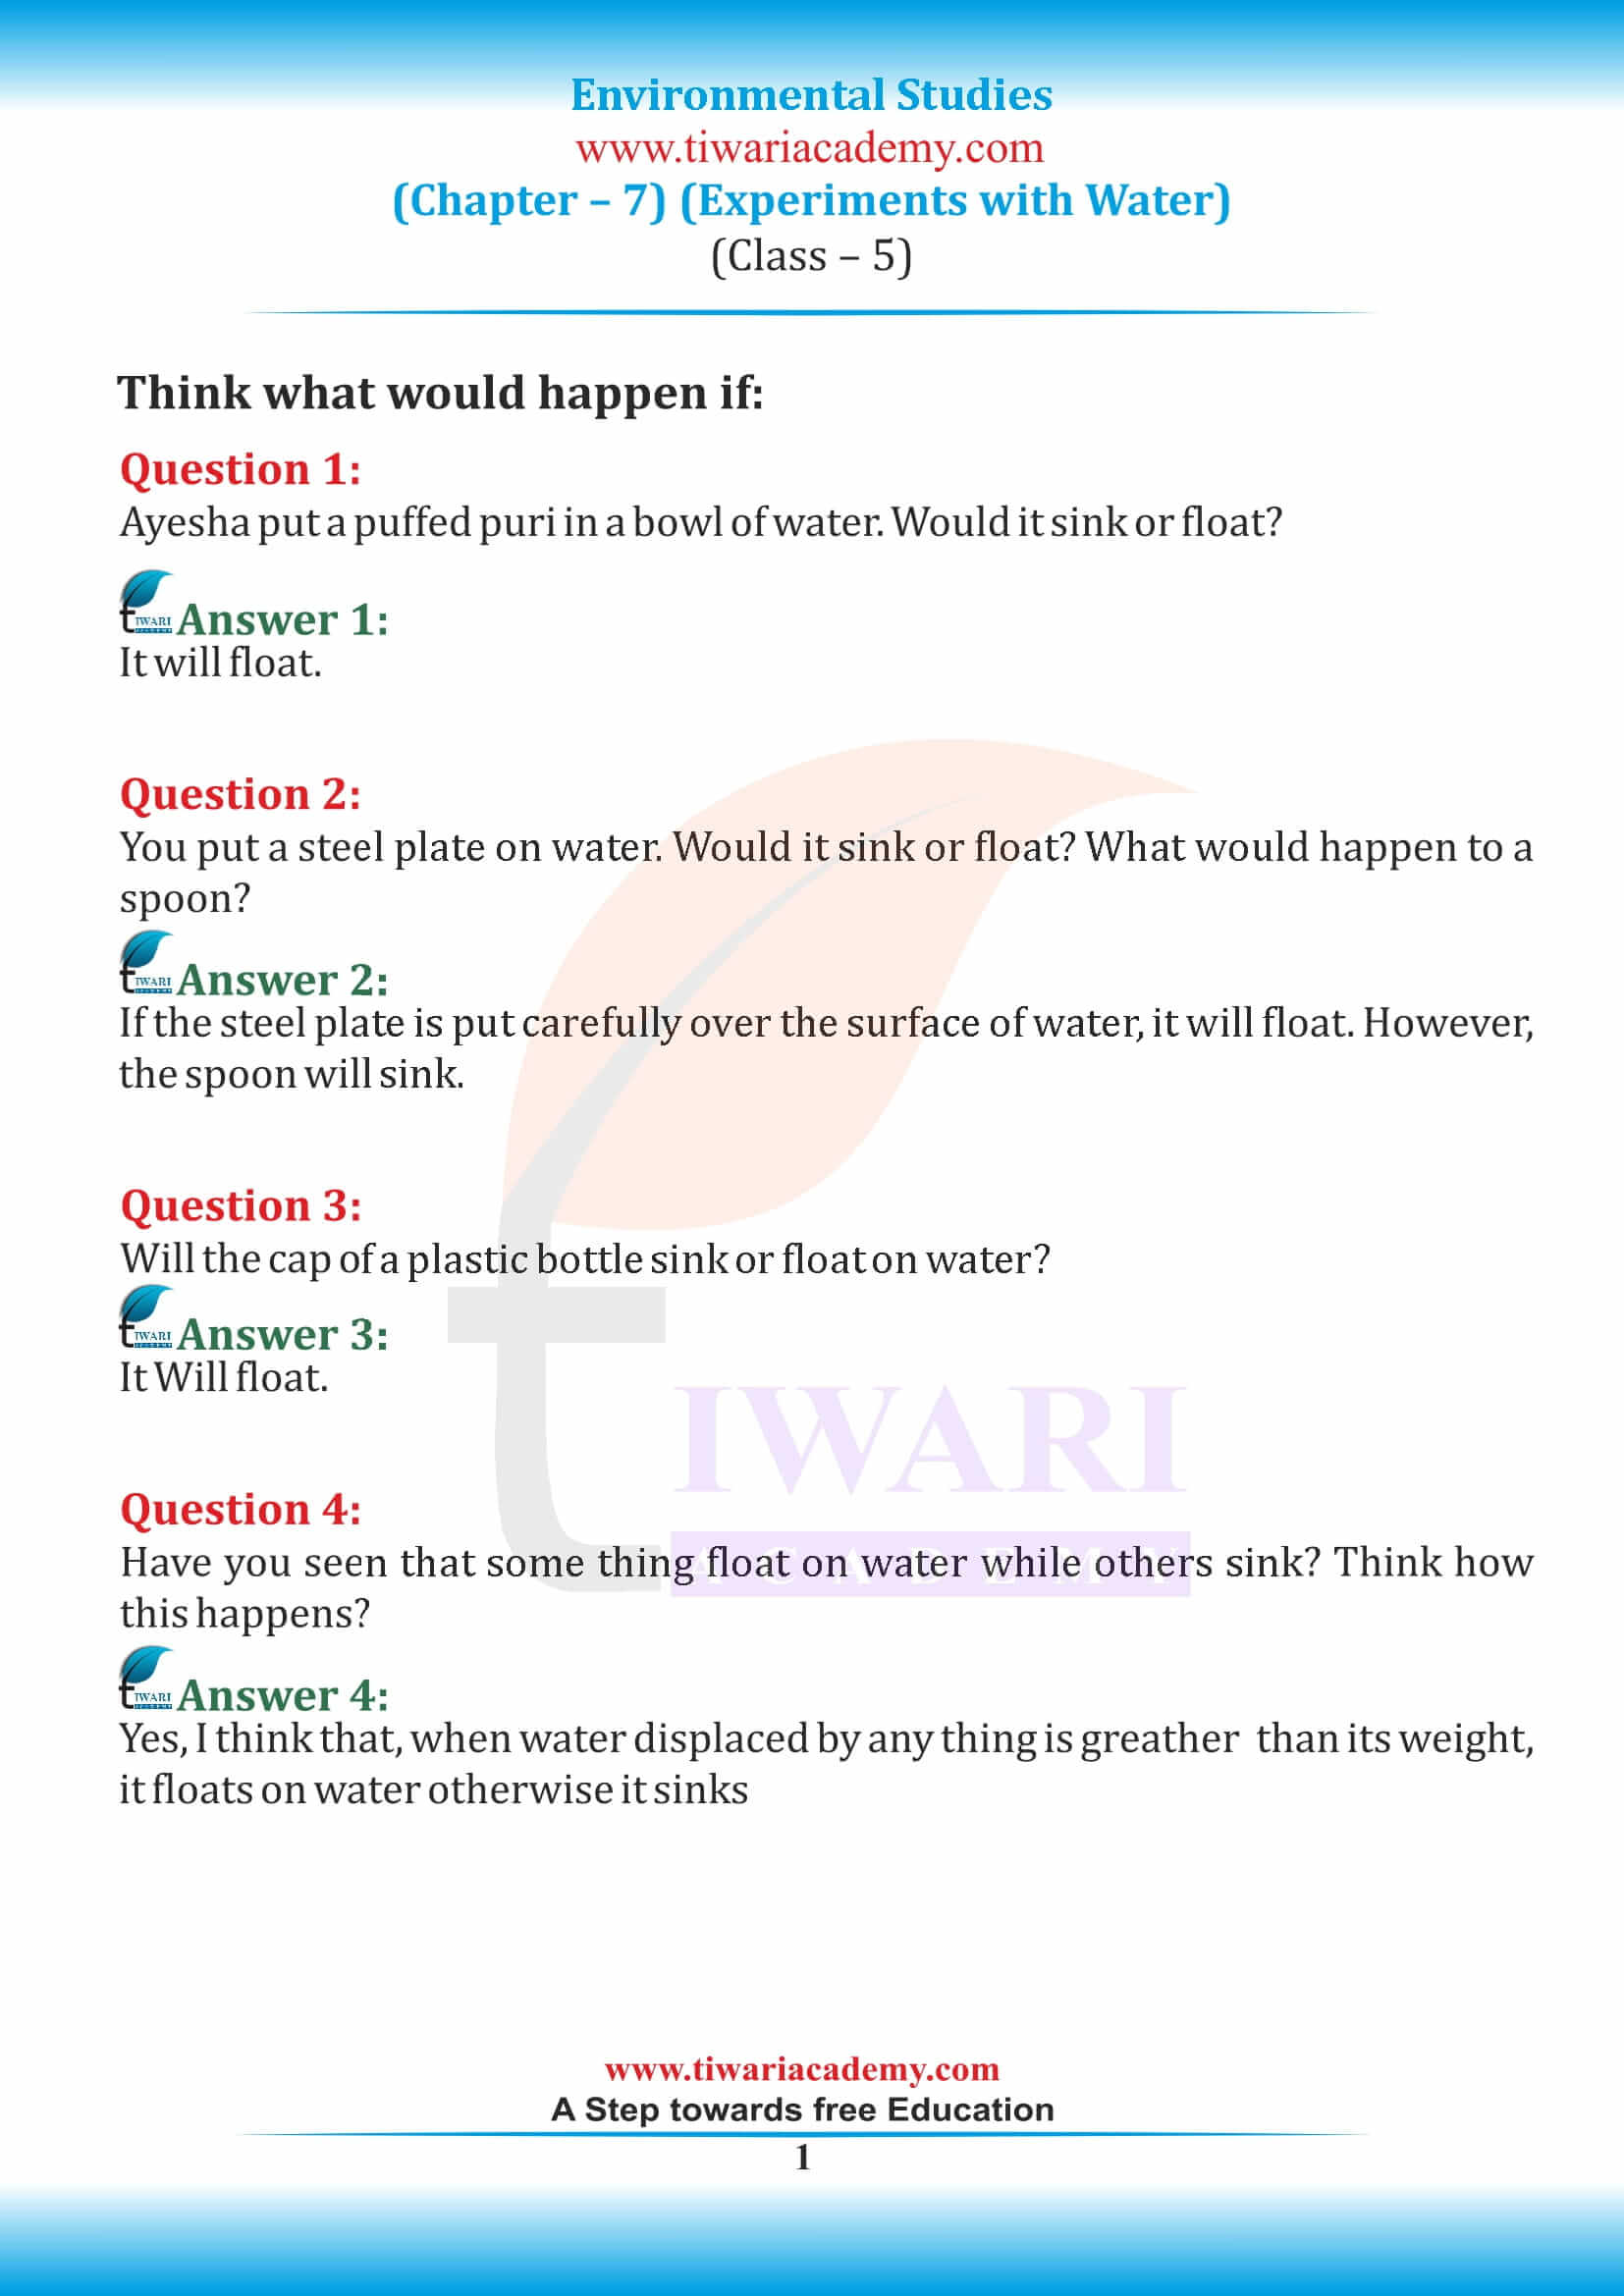 NCERT Solutions for Class 5 EVS Chapter 7 Experiments with Water